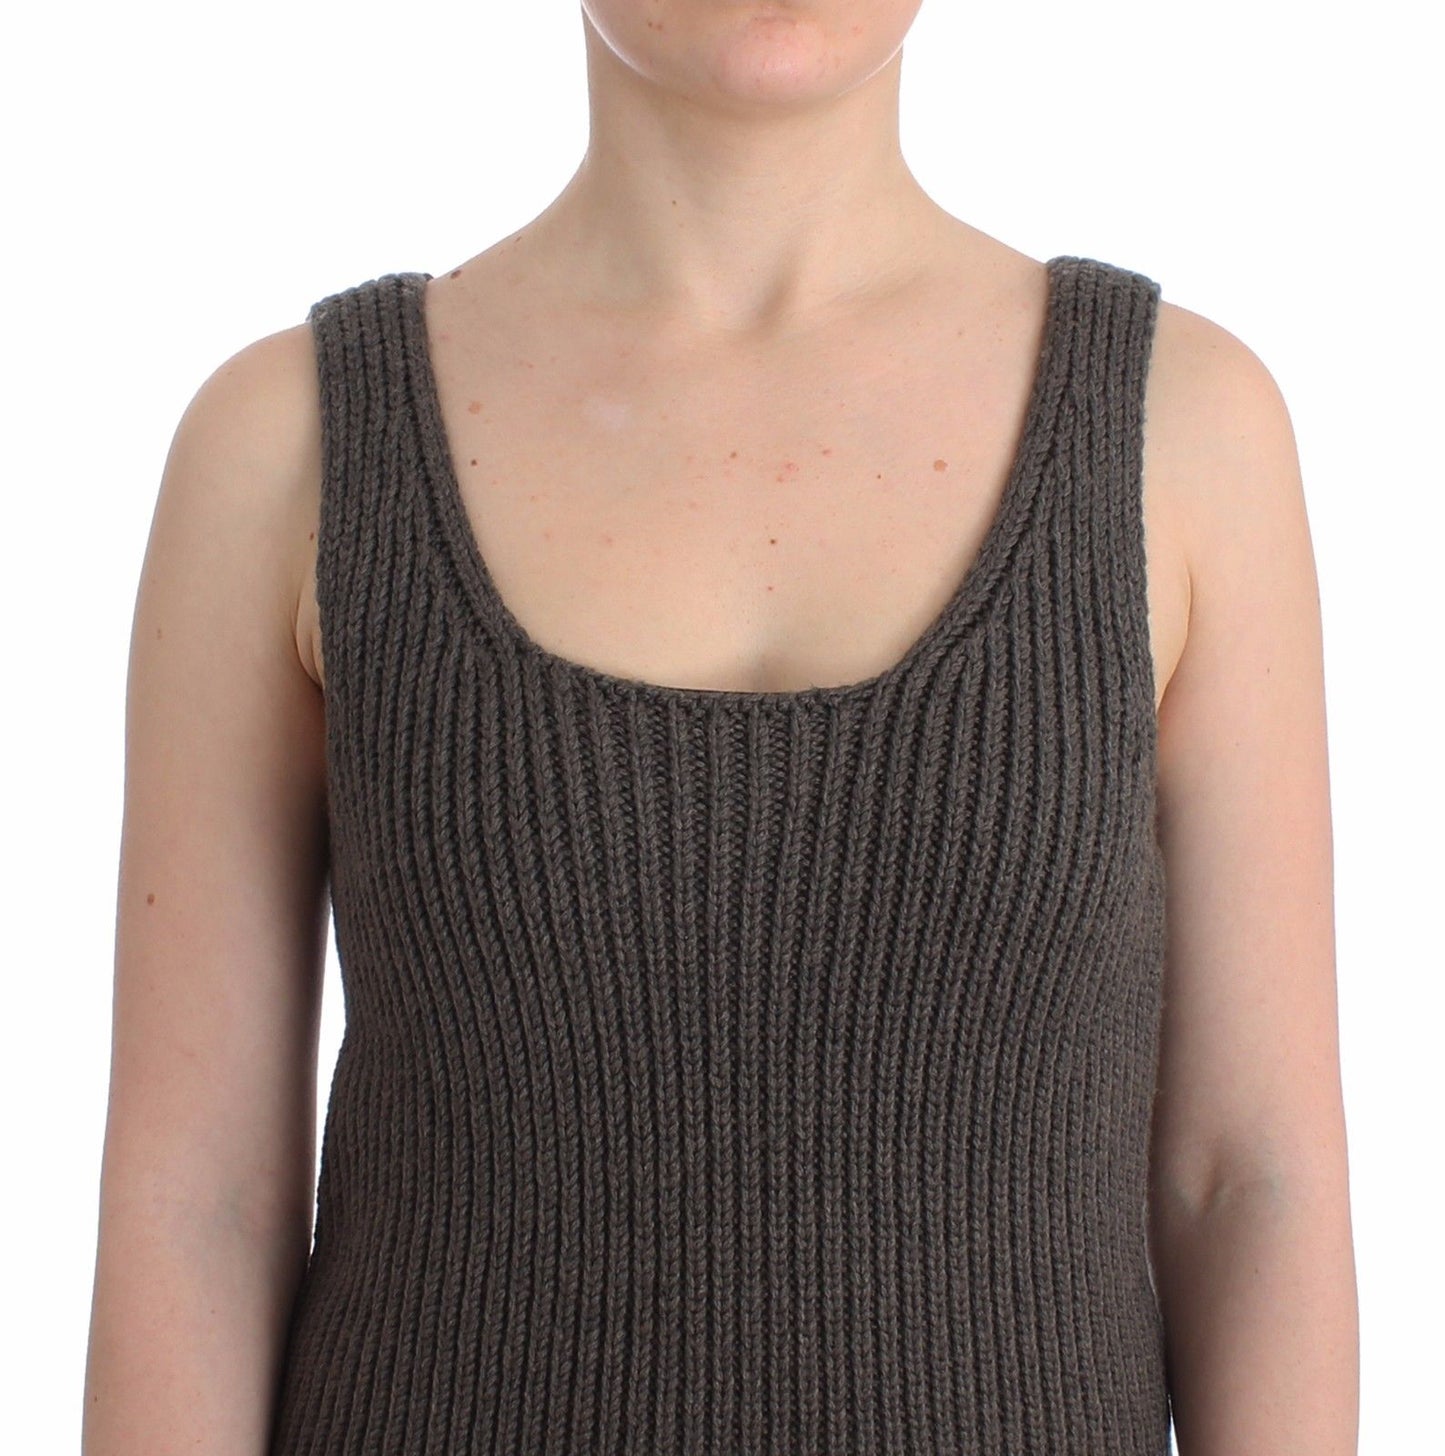 Gray Knit Top Knitted Sweater Merino Wool